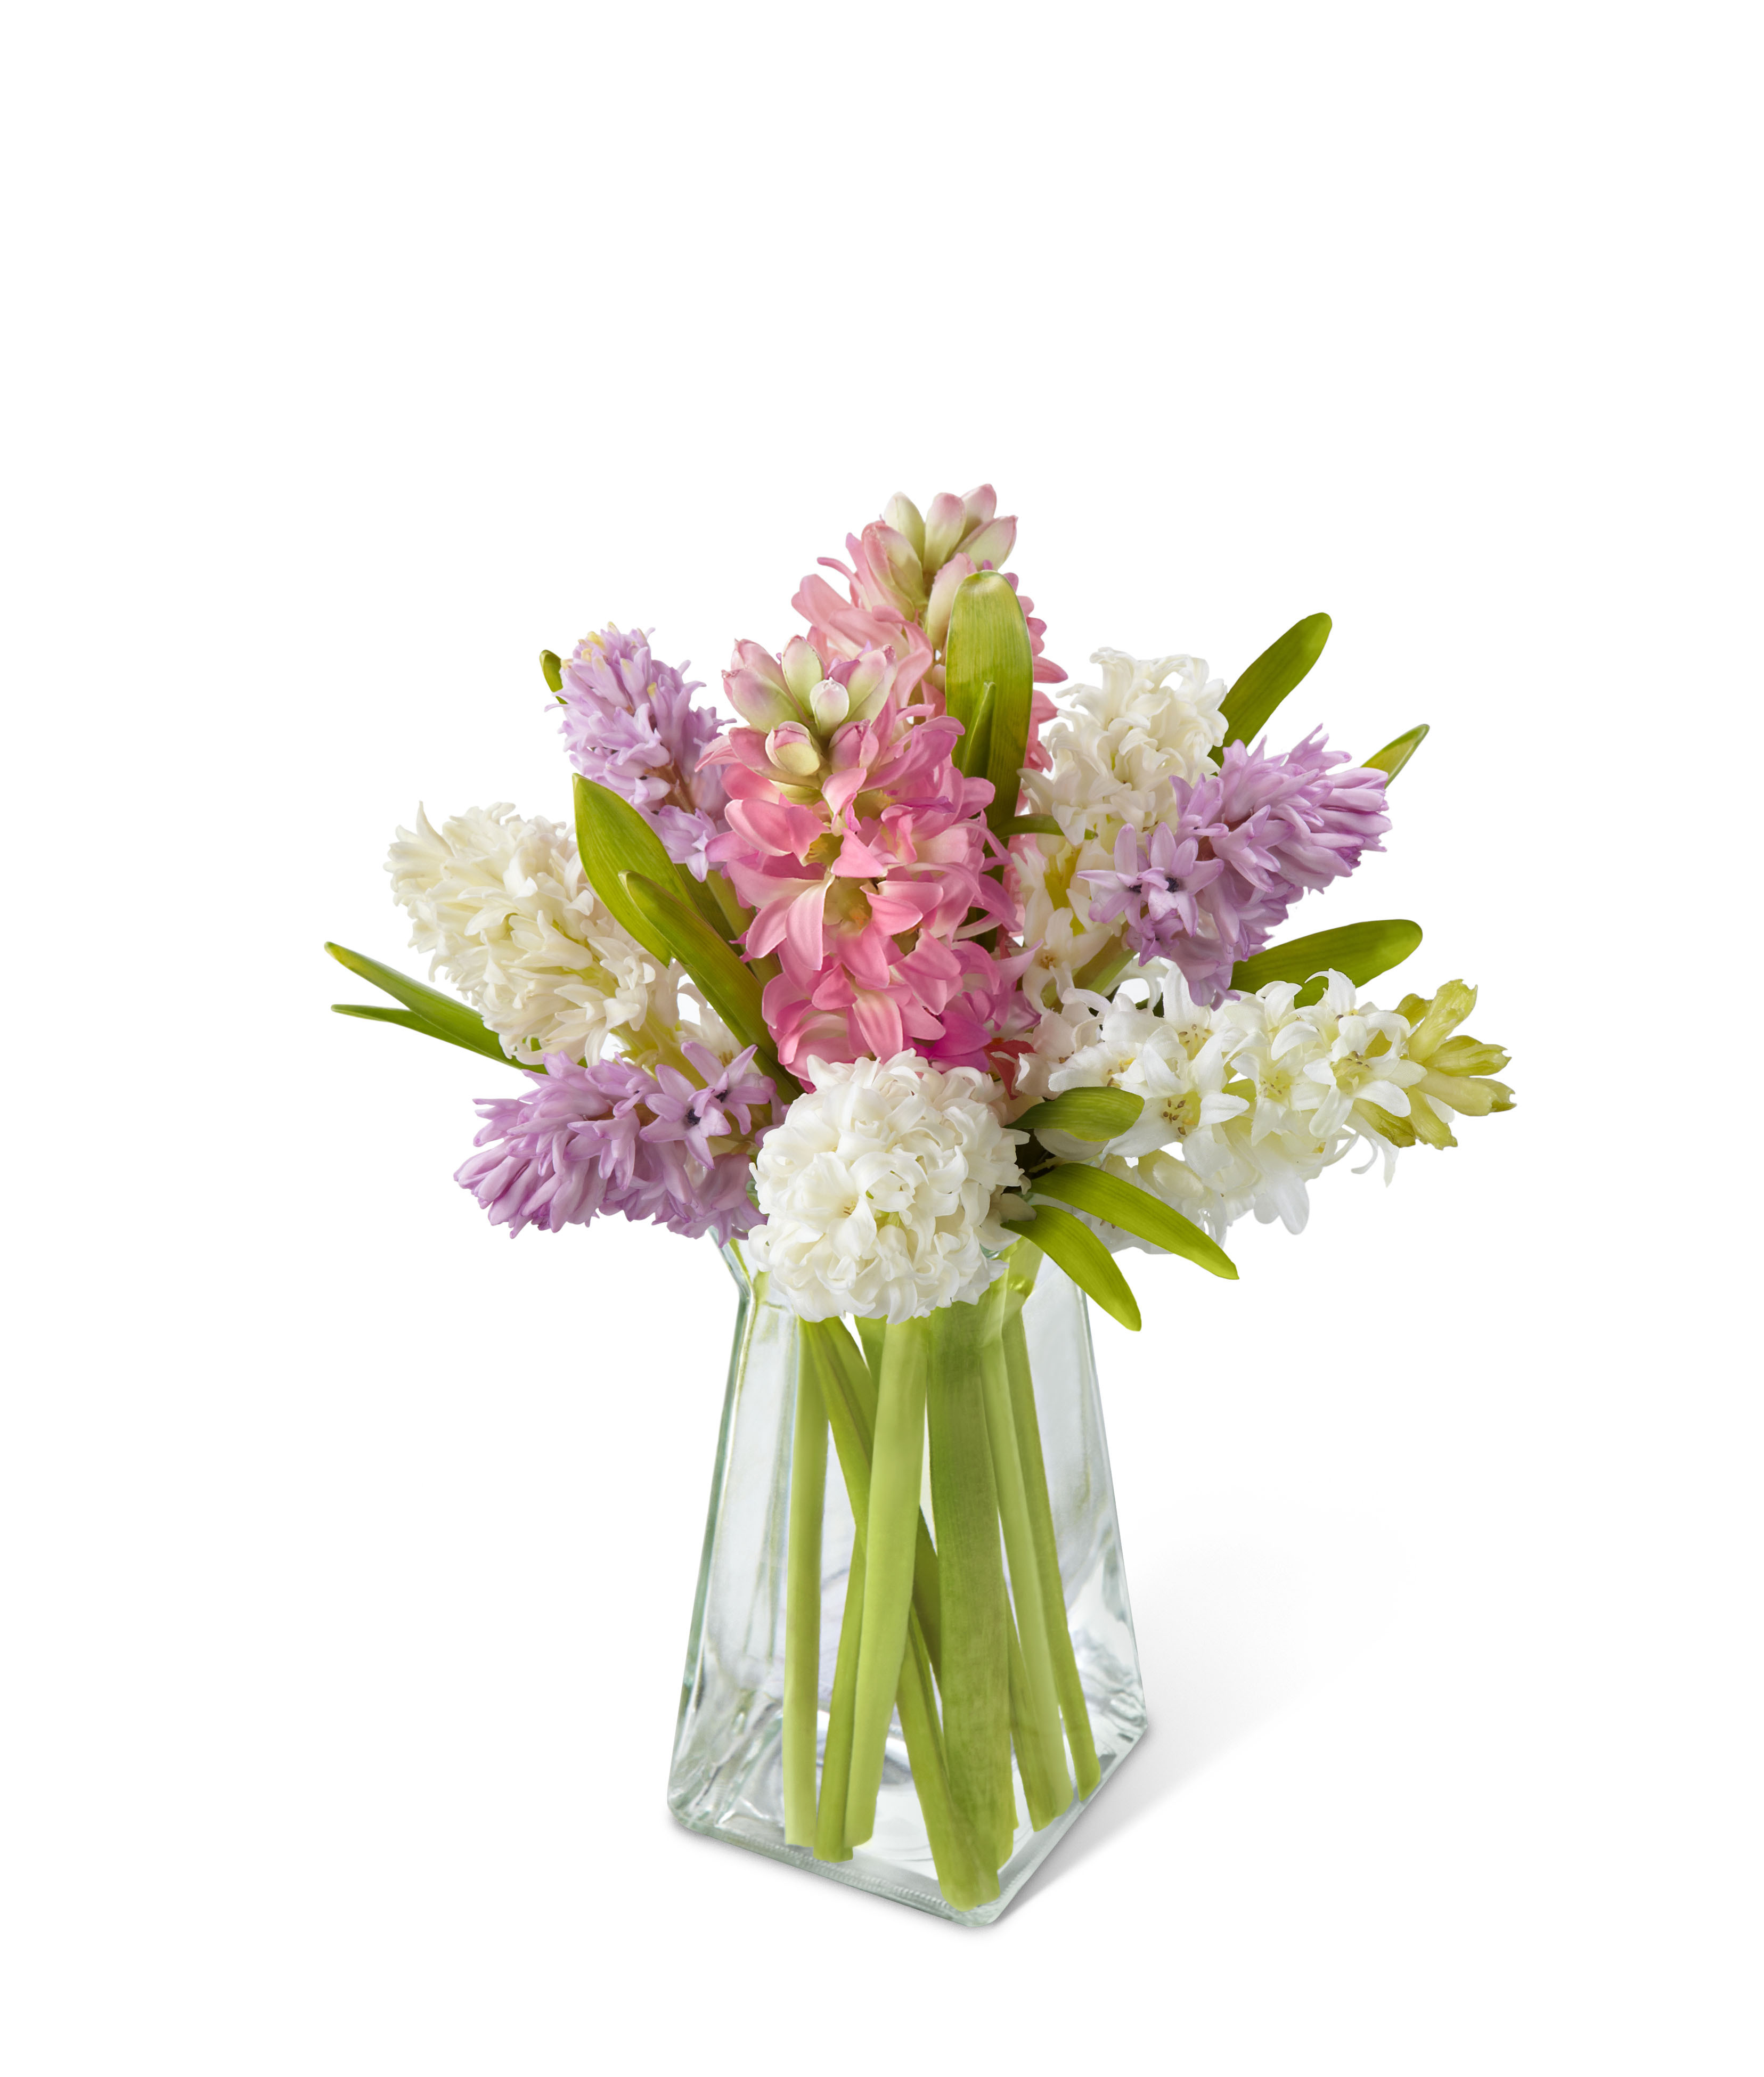 The FTD Pure Perfection Bouquet